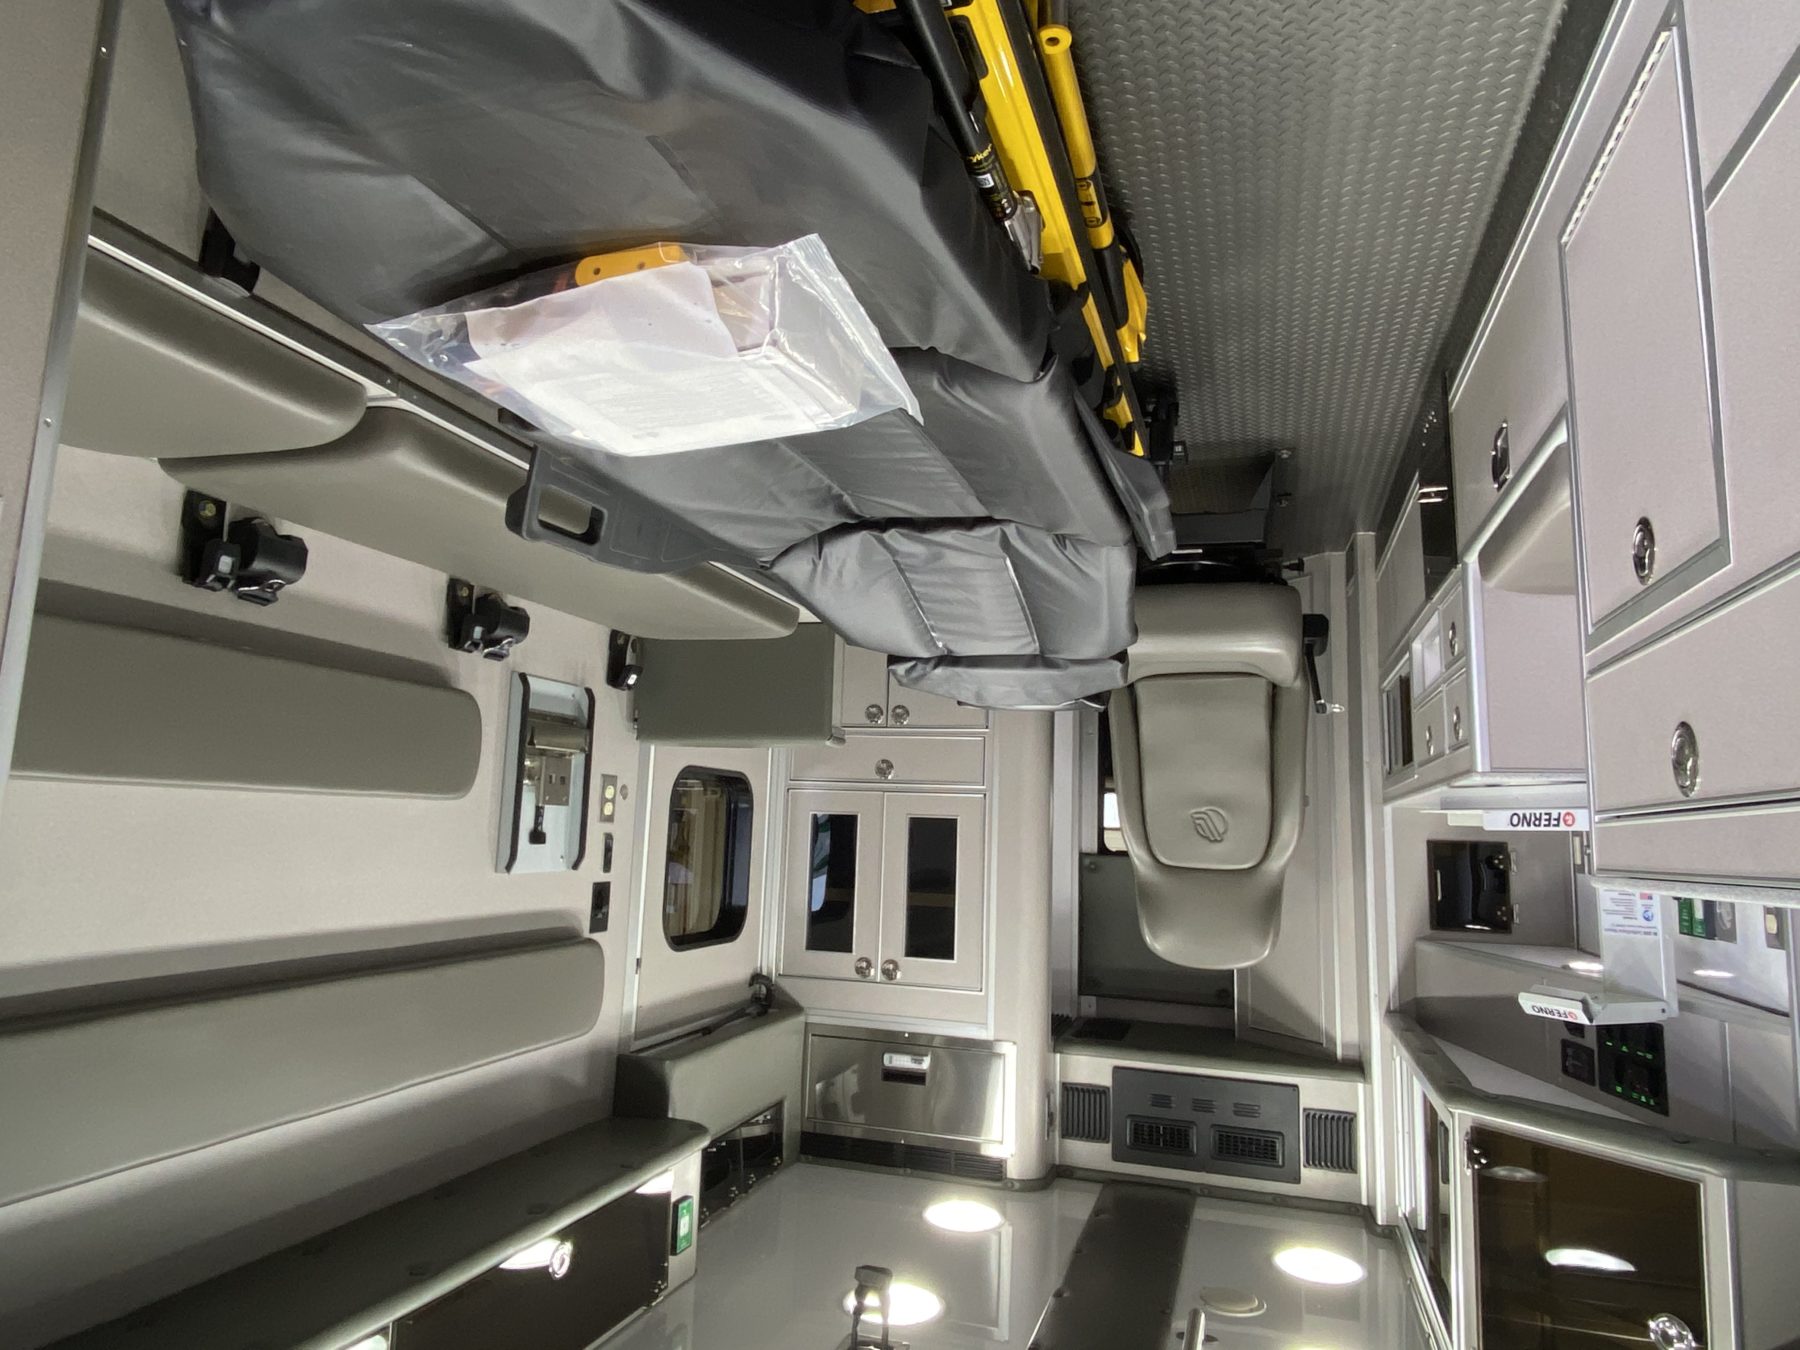 2019 Ram 4500 4x4 Heavy Duty Ambulance For Sale – Picture 8